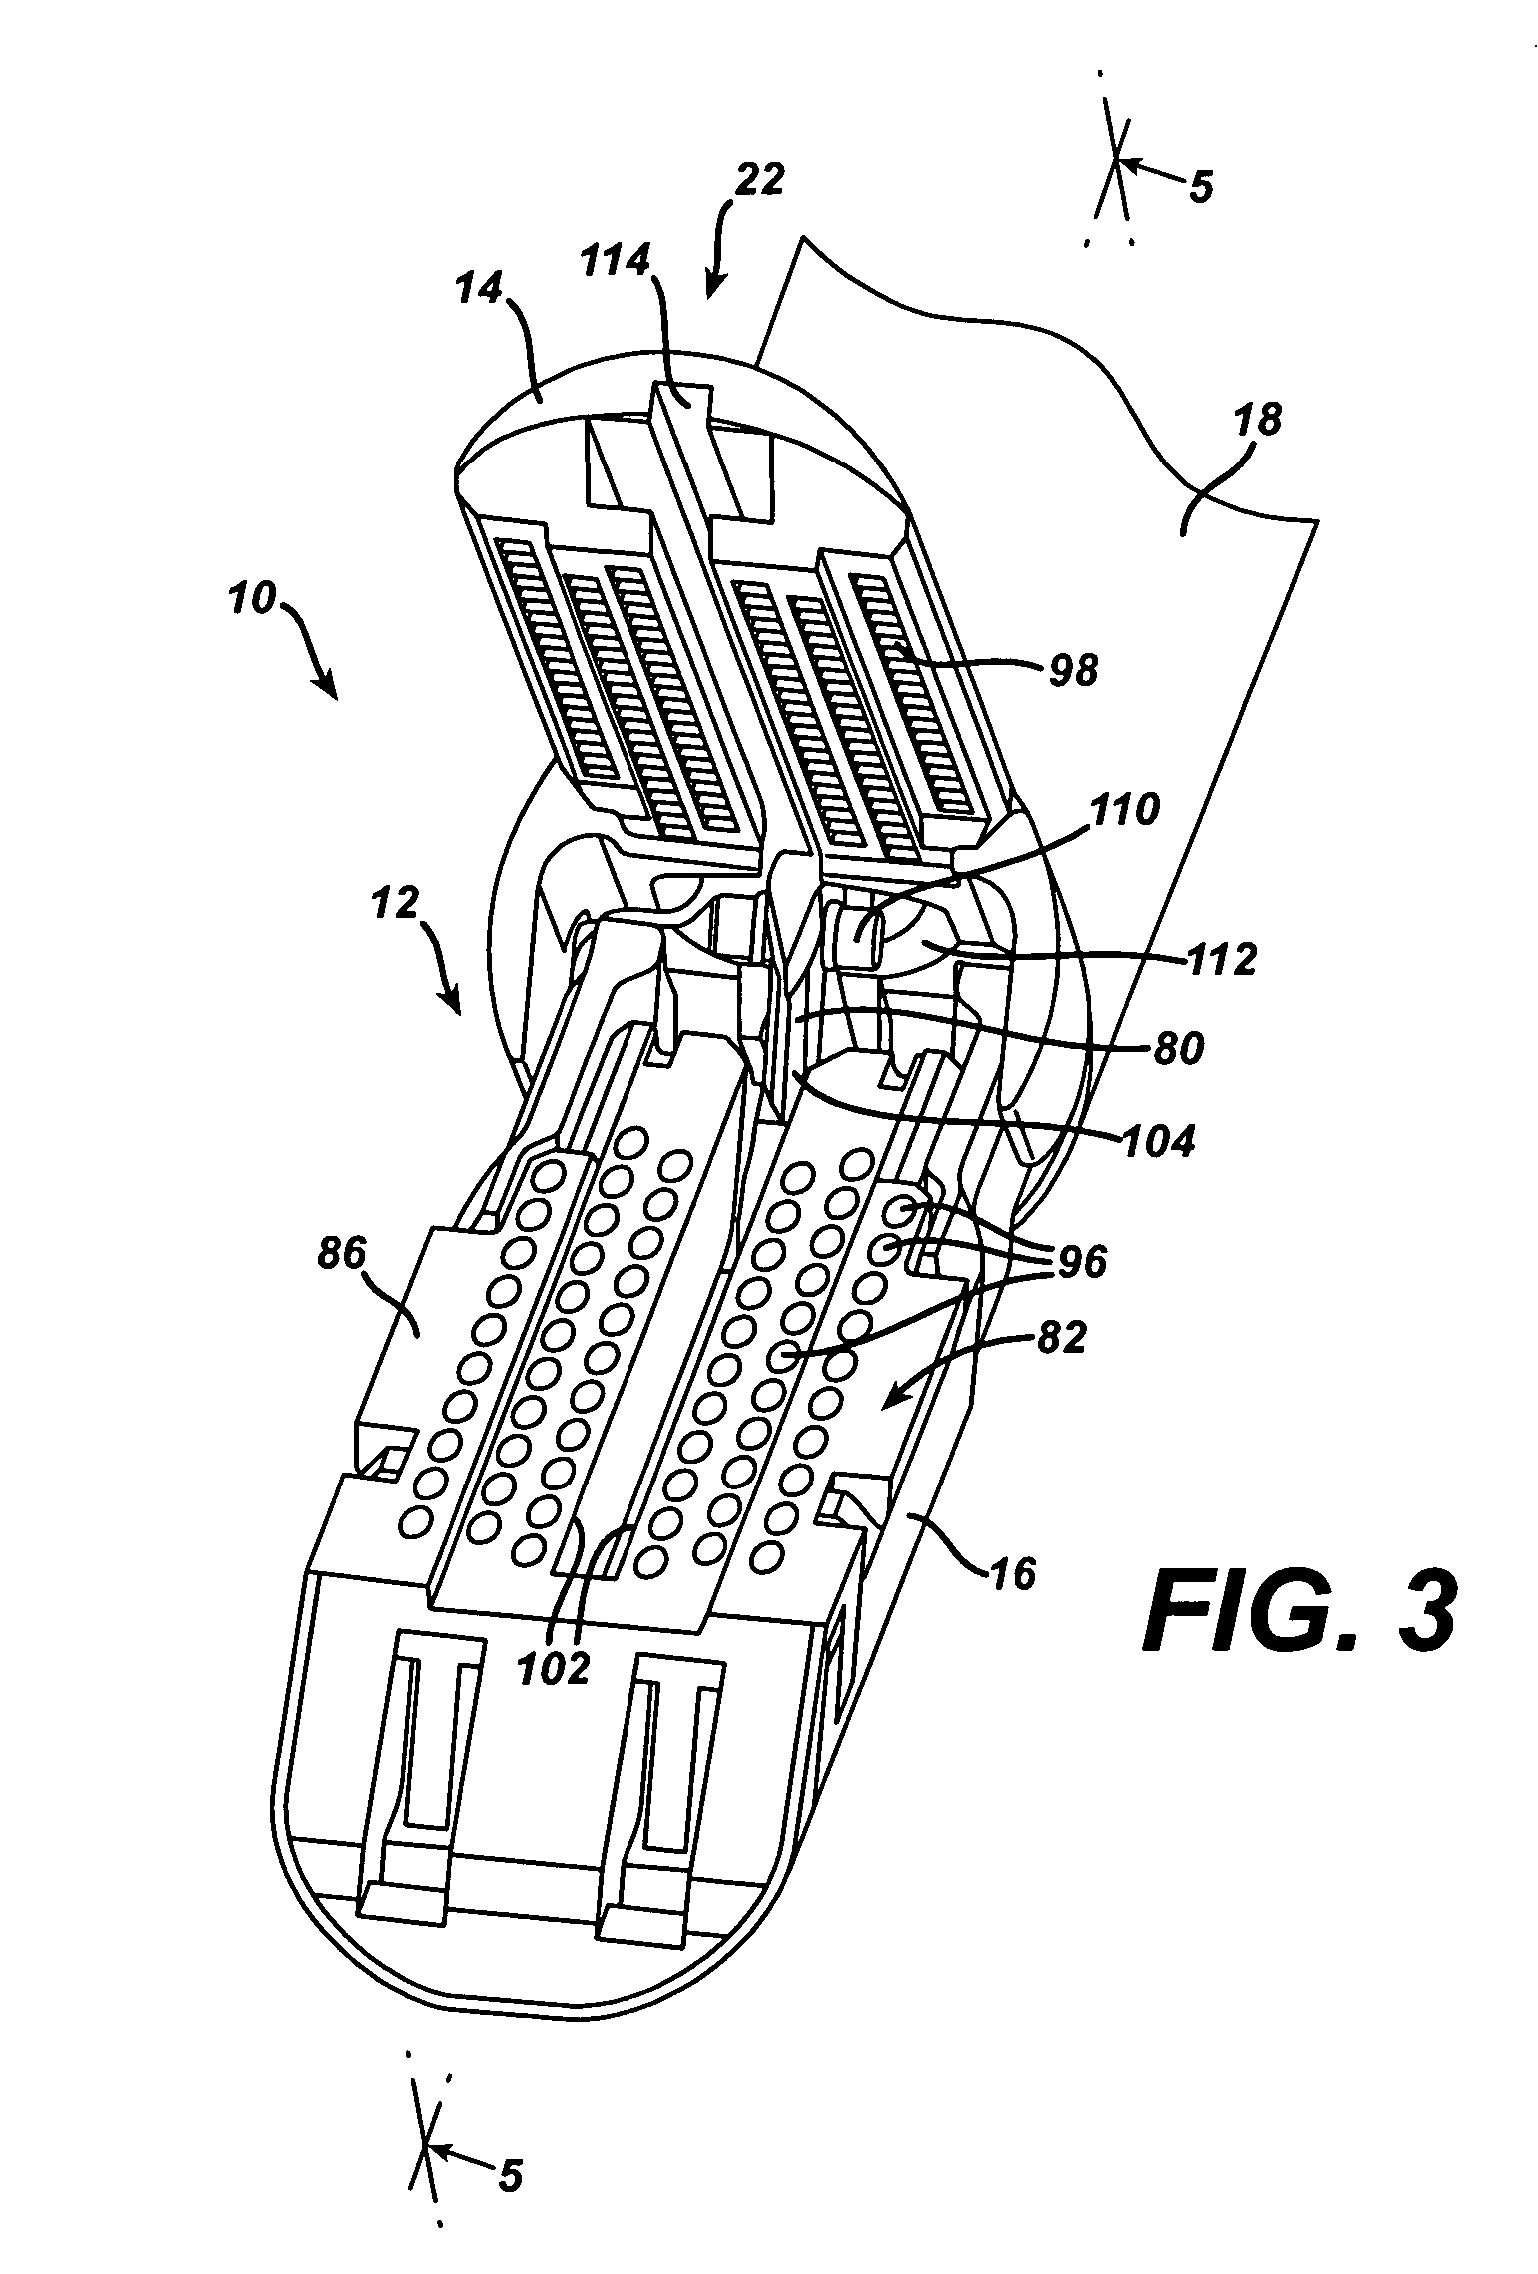 Surgical stapling instrument with multistroke firing incorporating an anti-backup mechanism